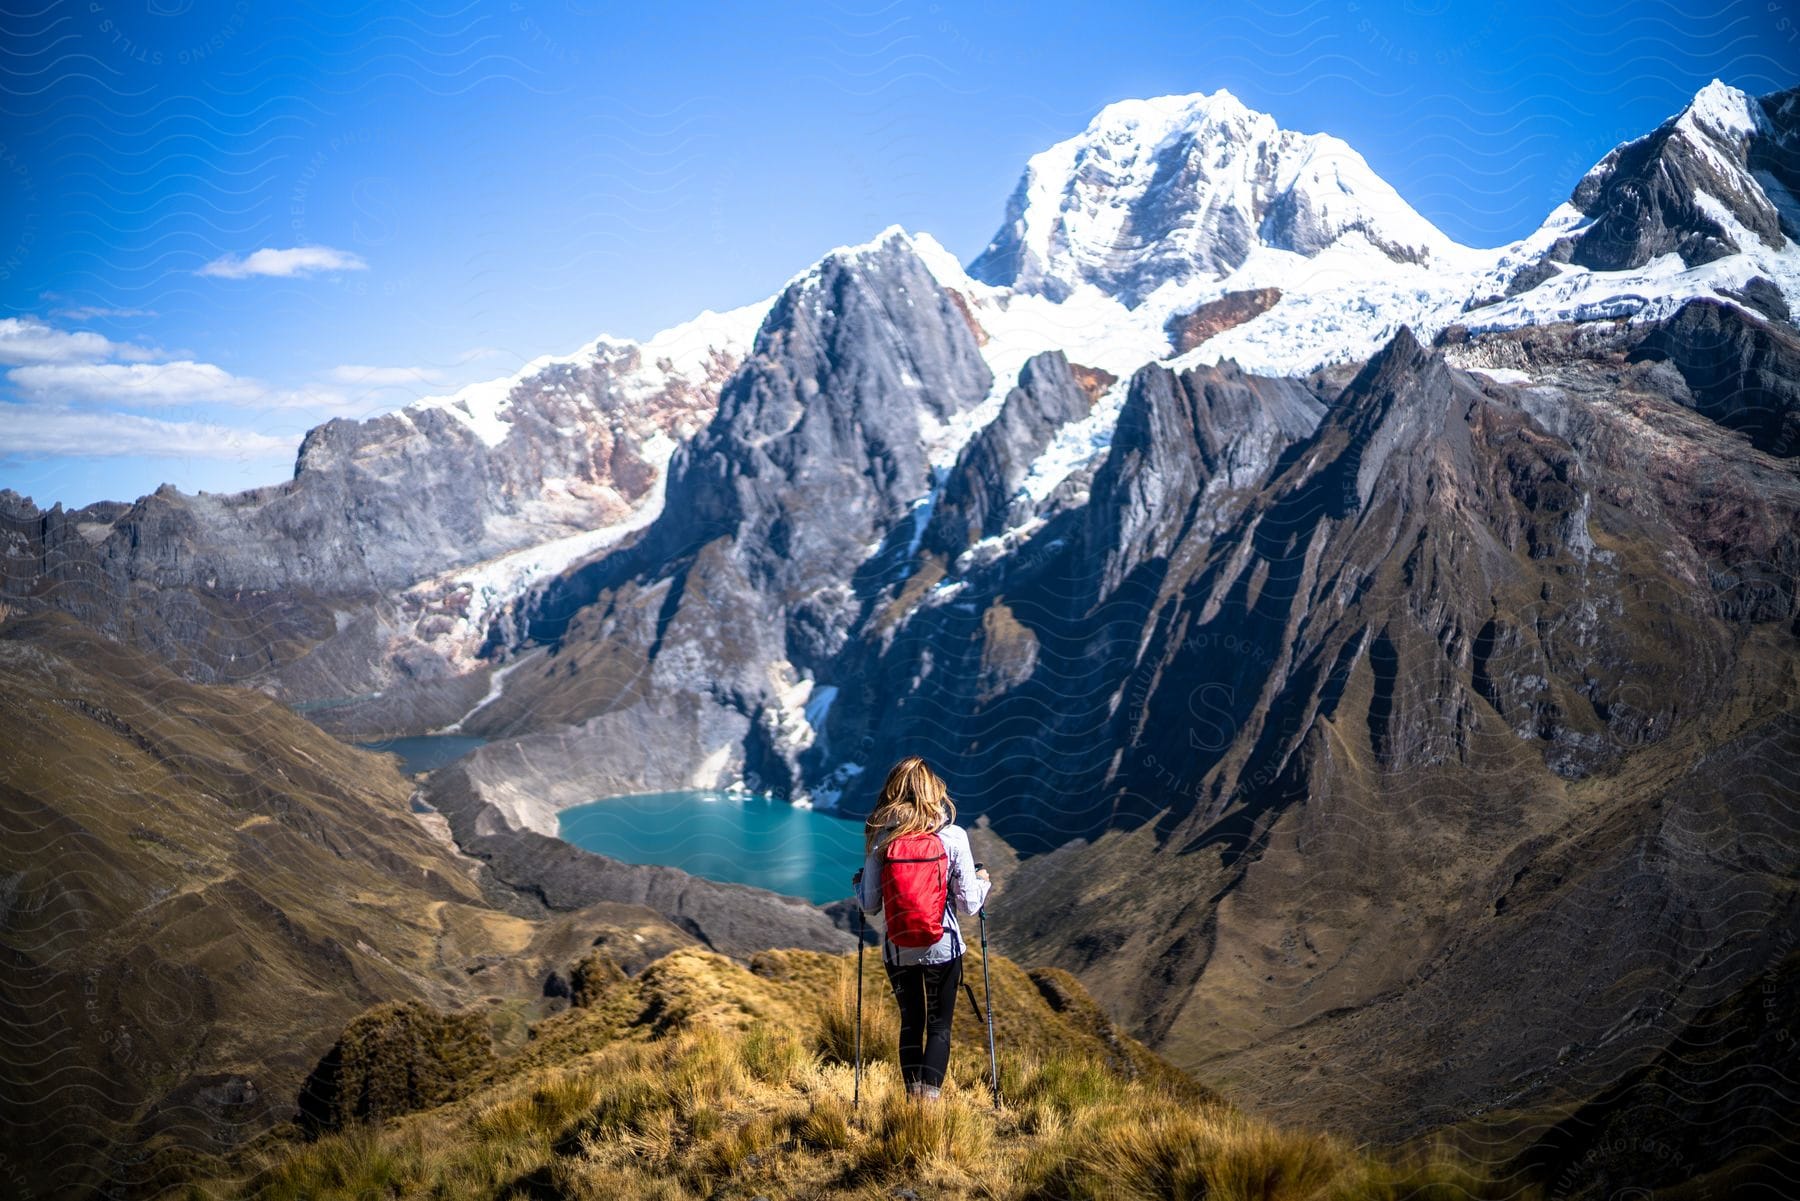 A woman hikes in snowy mountains and pauses to look at a body of water below